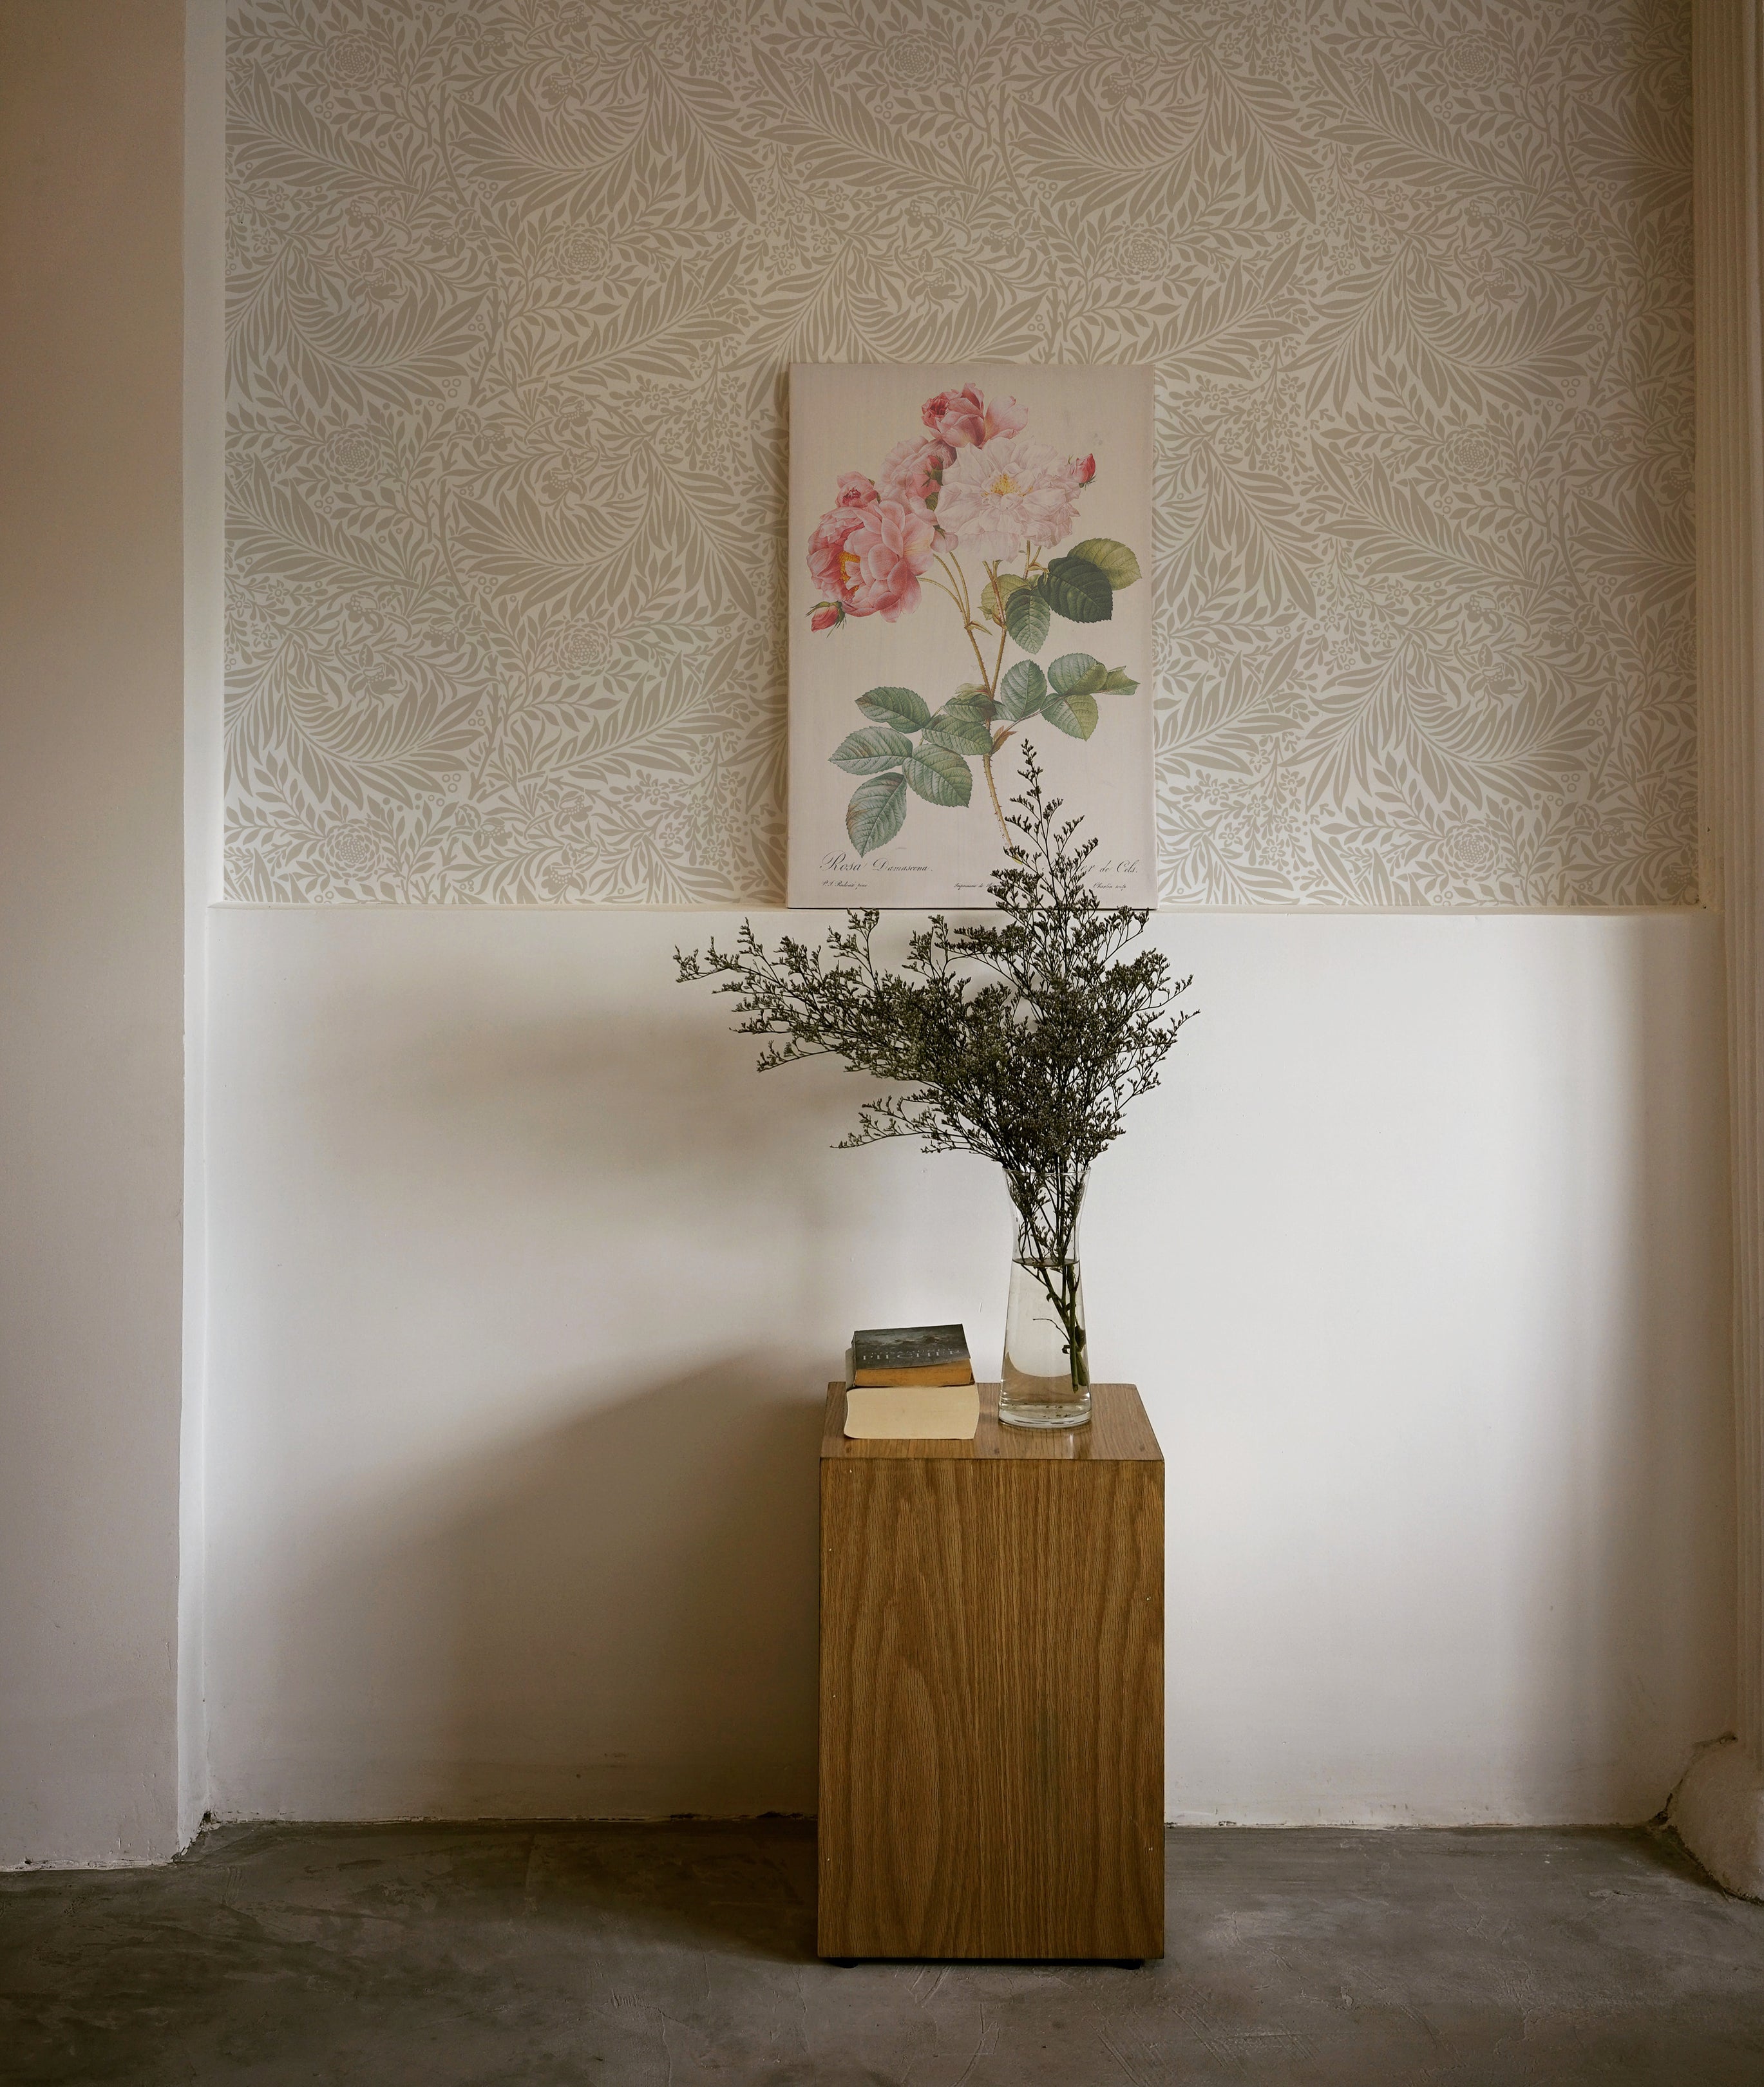 An interior corner showcasing the 'William Bough Wallpaper' with a large-leafed botanical pattern in muted tones, accented by a framed floral artwork and a rustic wooden pedestal with a vase and book.